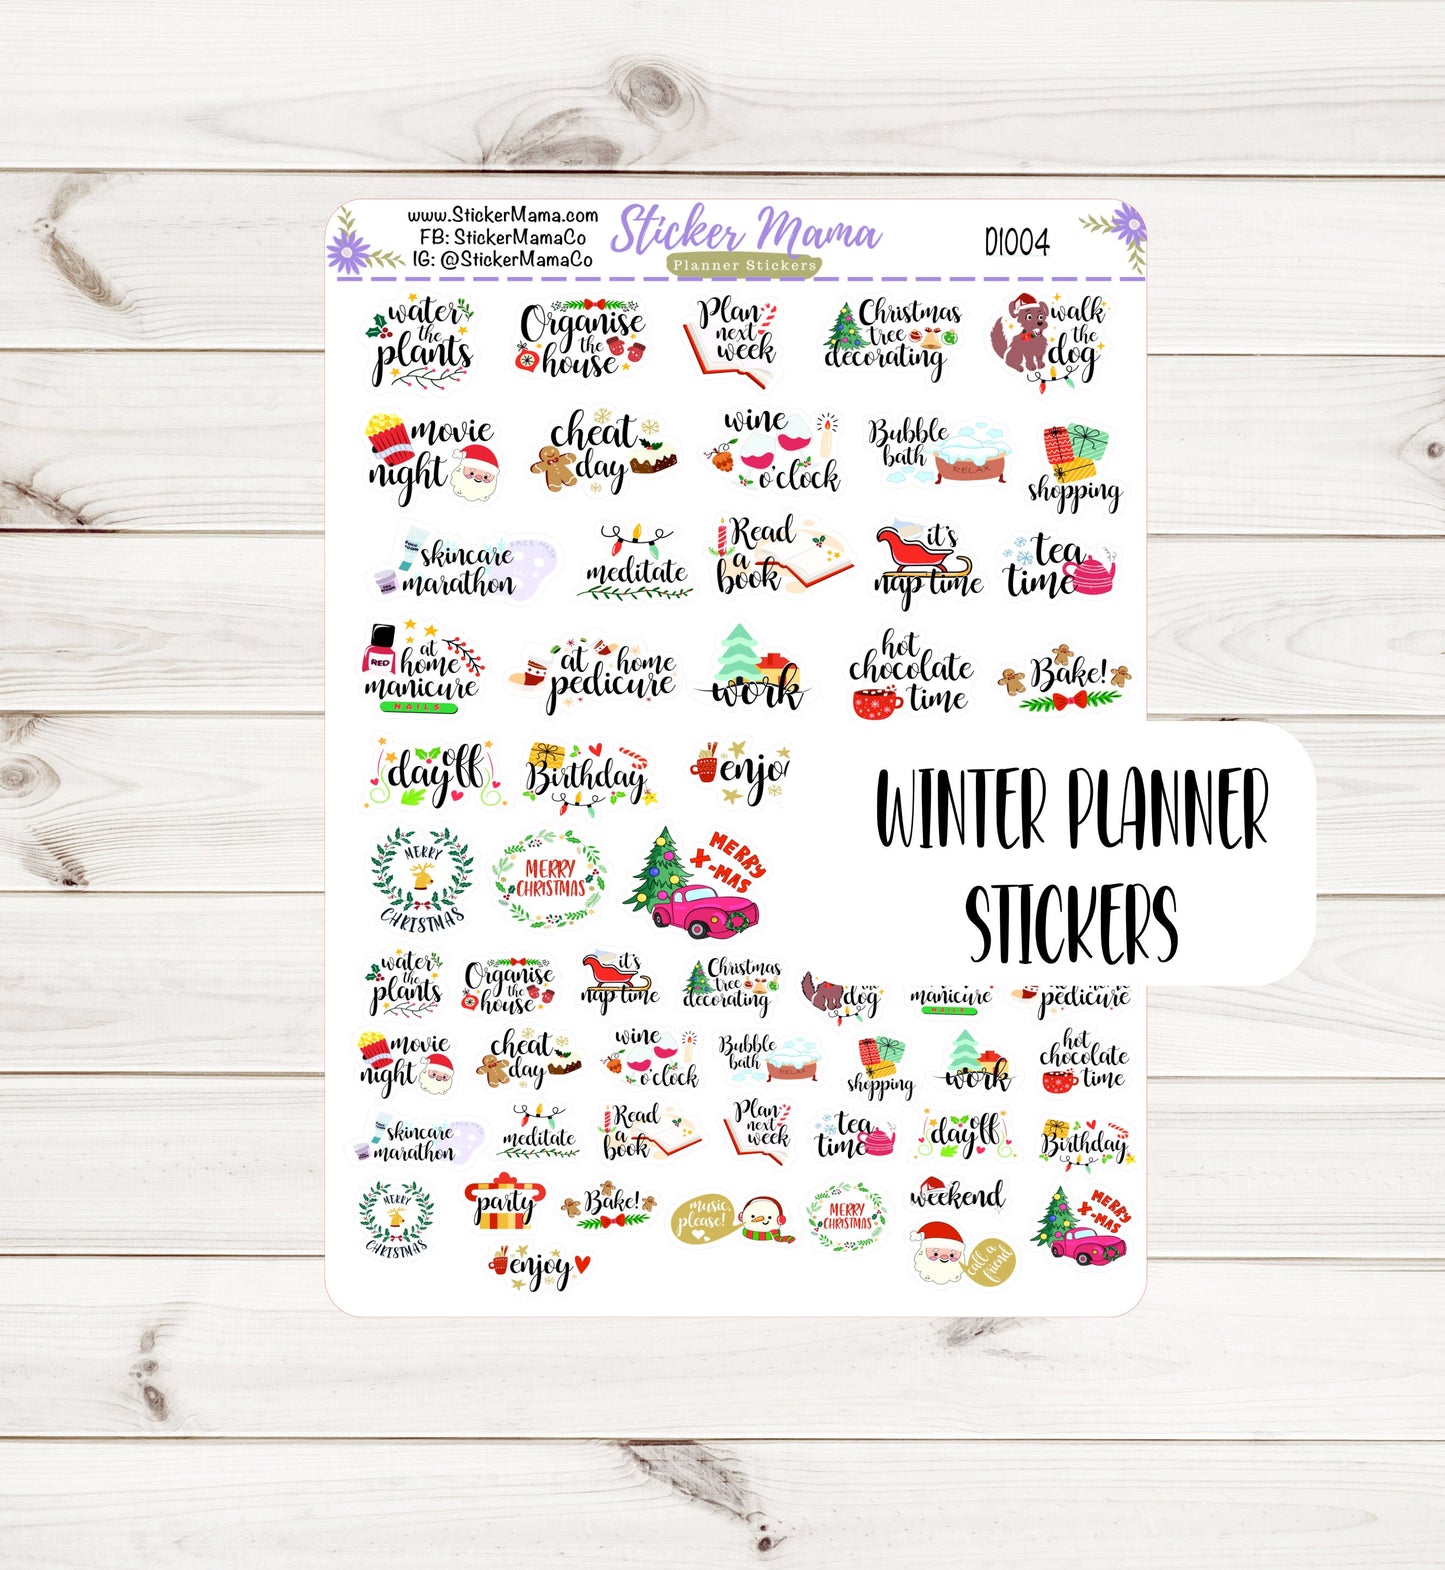 D1004 || WINTER PLANNER STICKERS || Winter Stickers || Planner Stickers for Winter